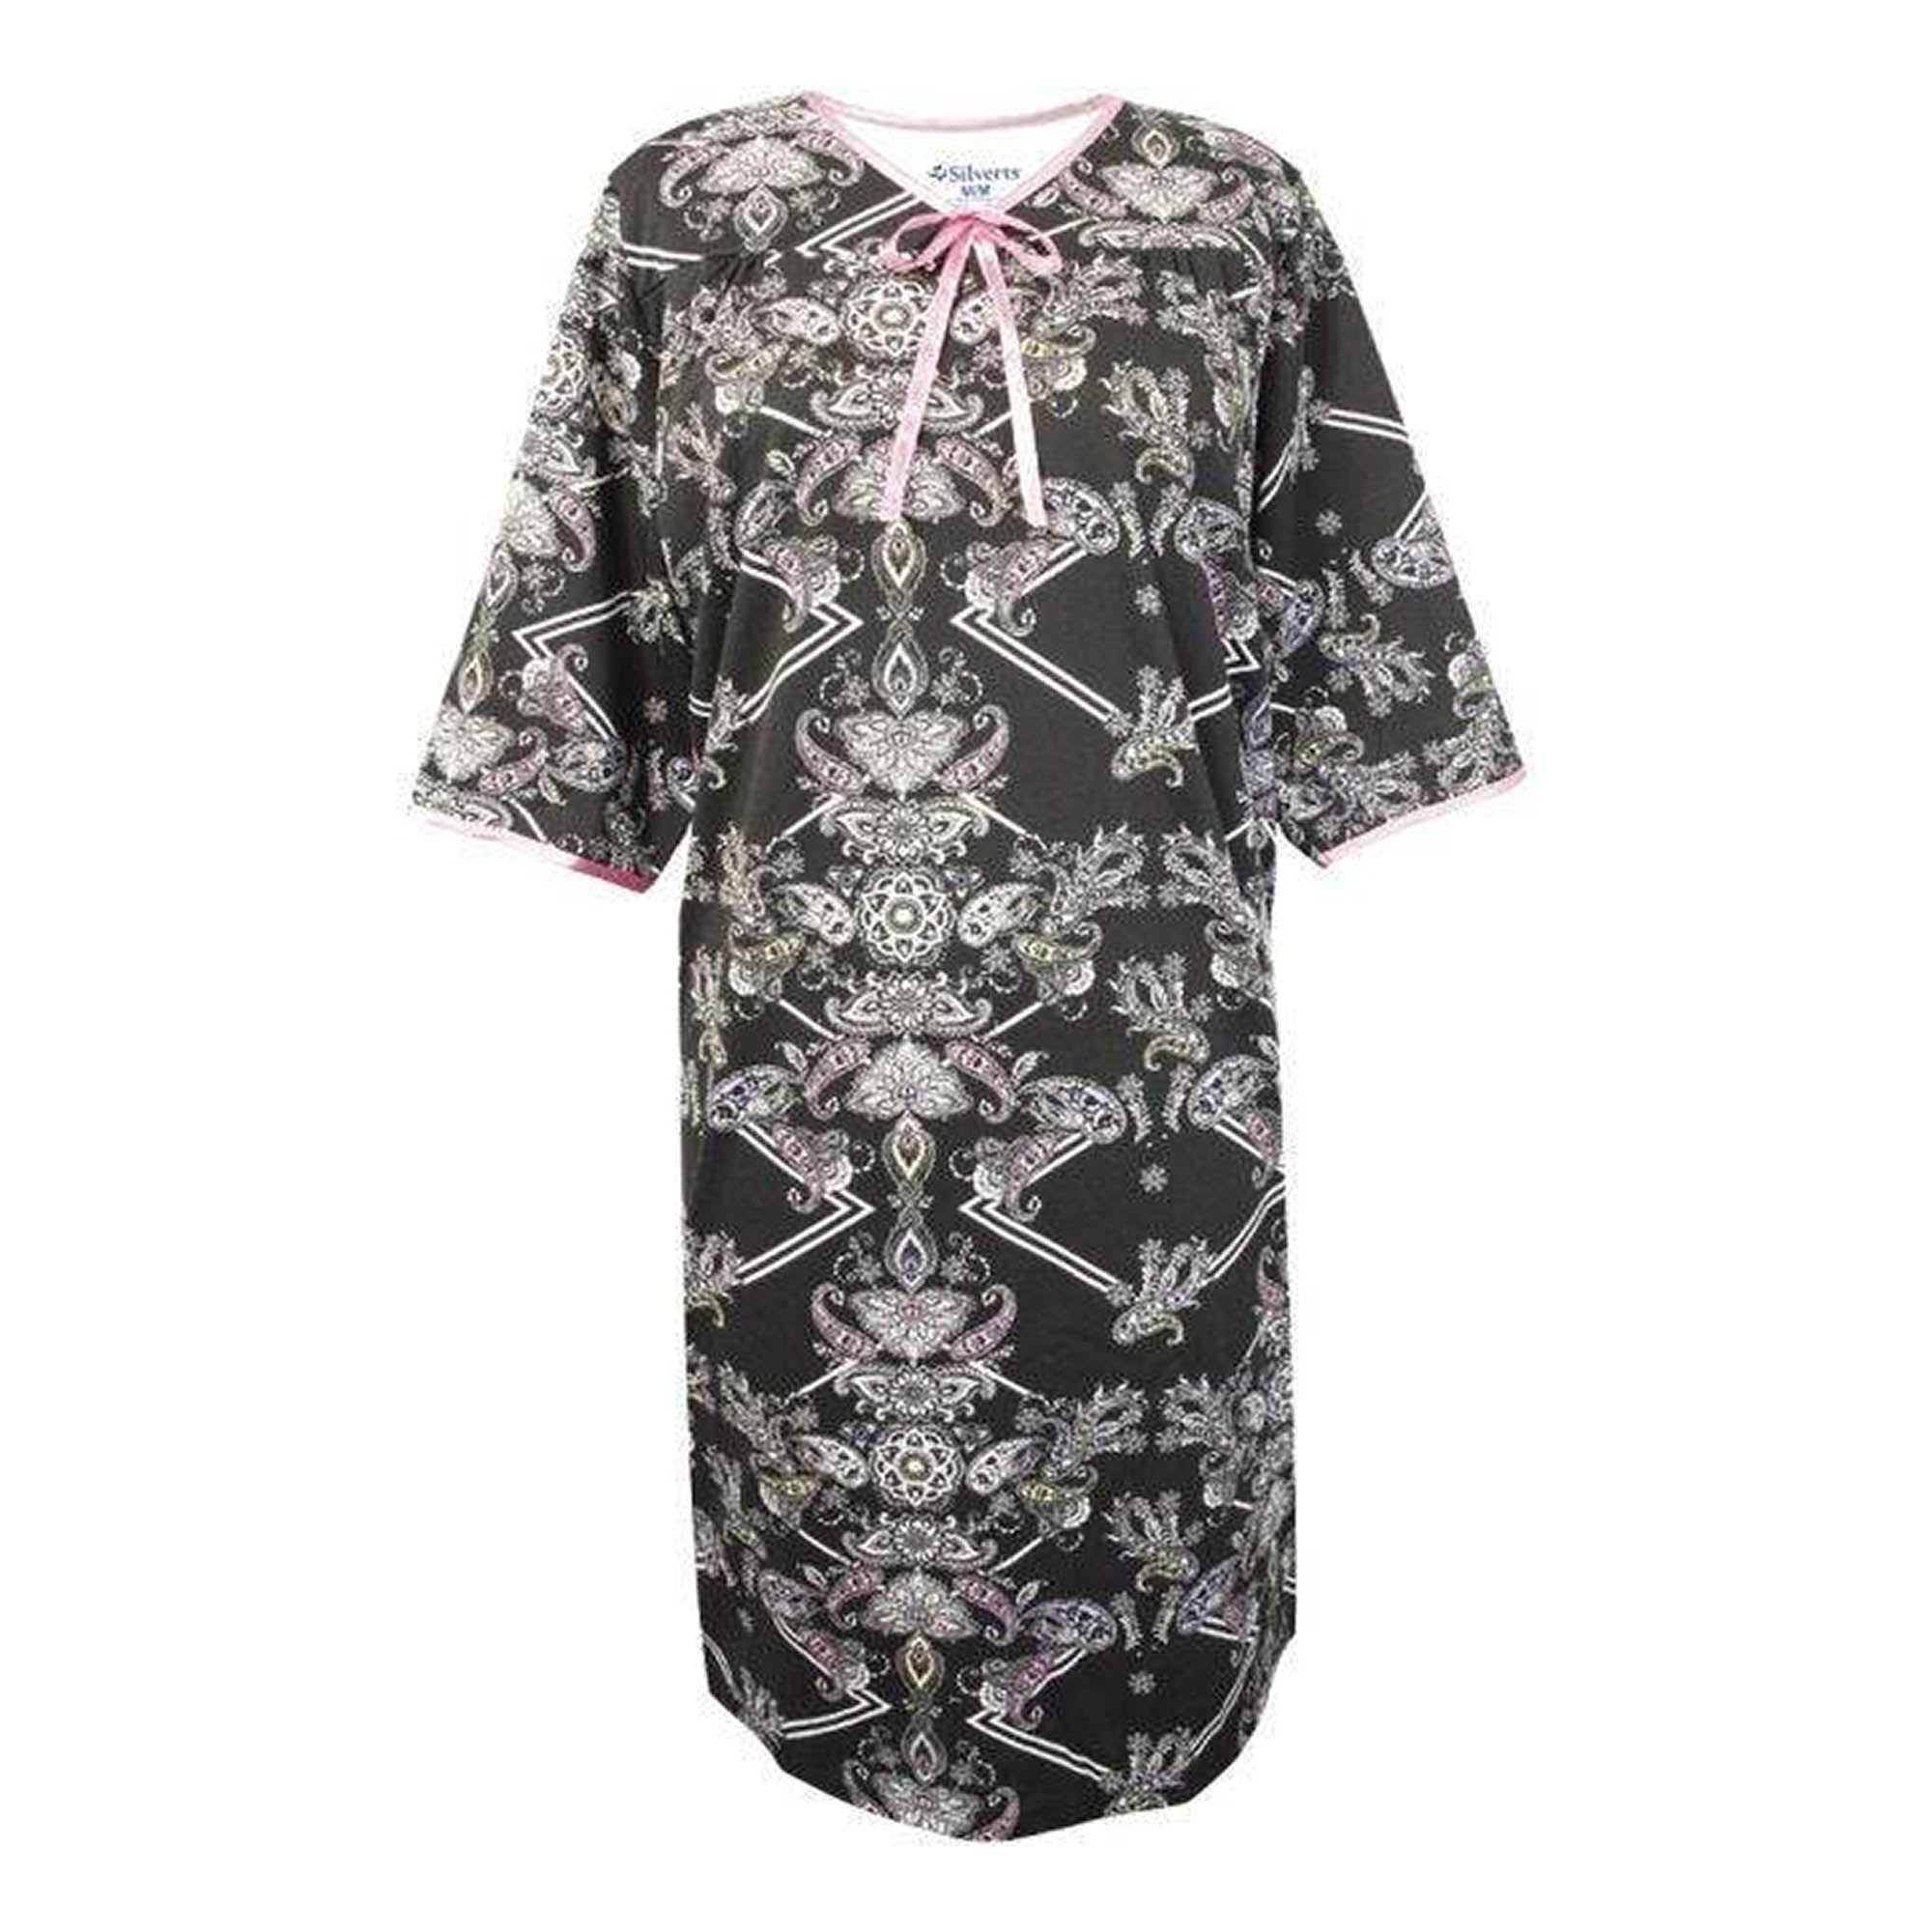 Silverts Women's Open Back Antimicrobial Nightgown - Adaptive Clothing - Perfect Paisley - M